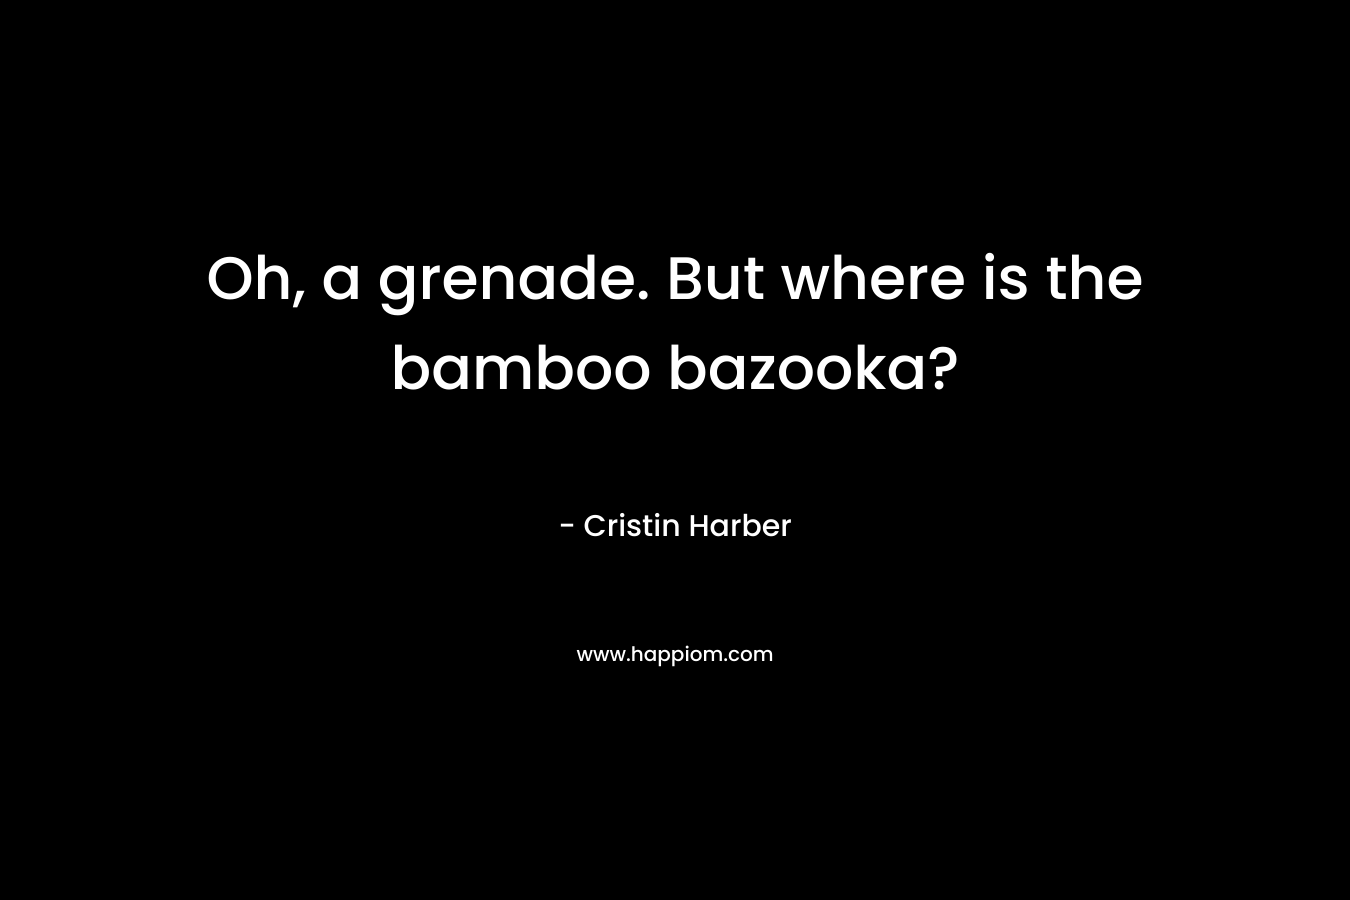 Oh, a grenade. But where is the bamboo bazooka? – Cristin Harber